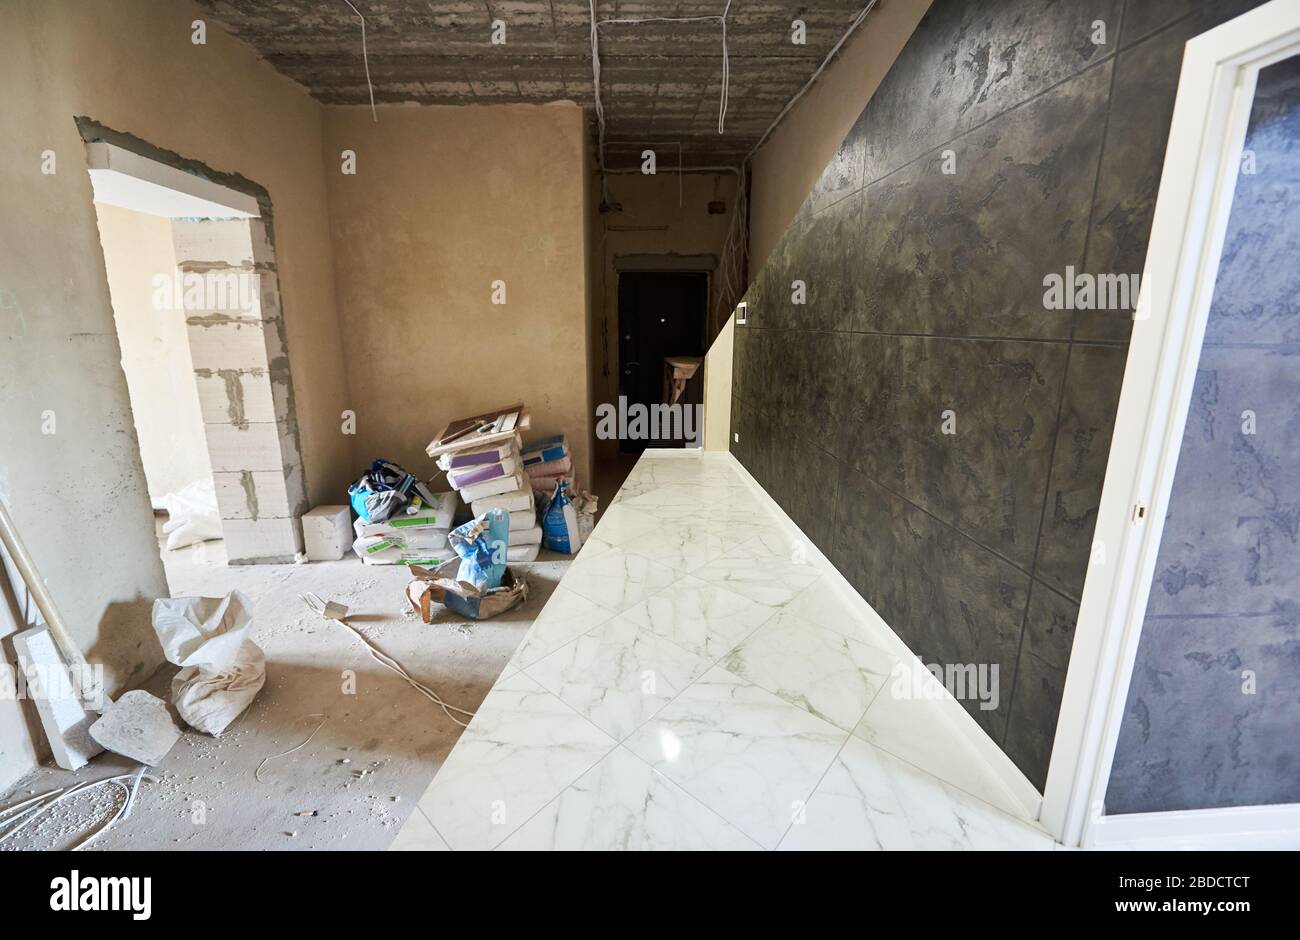 Messy dirty room at the beginning of reconstruction works vs clean shiny tiled part of a new room, white floor and black wall, renovation concept Stock Photo